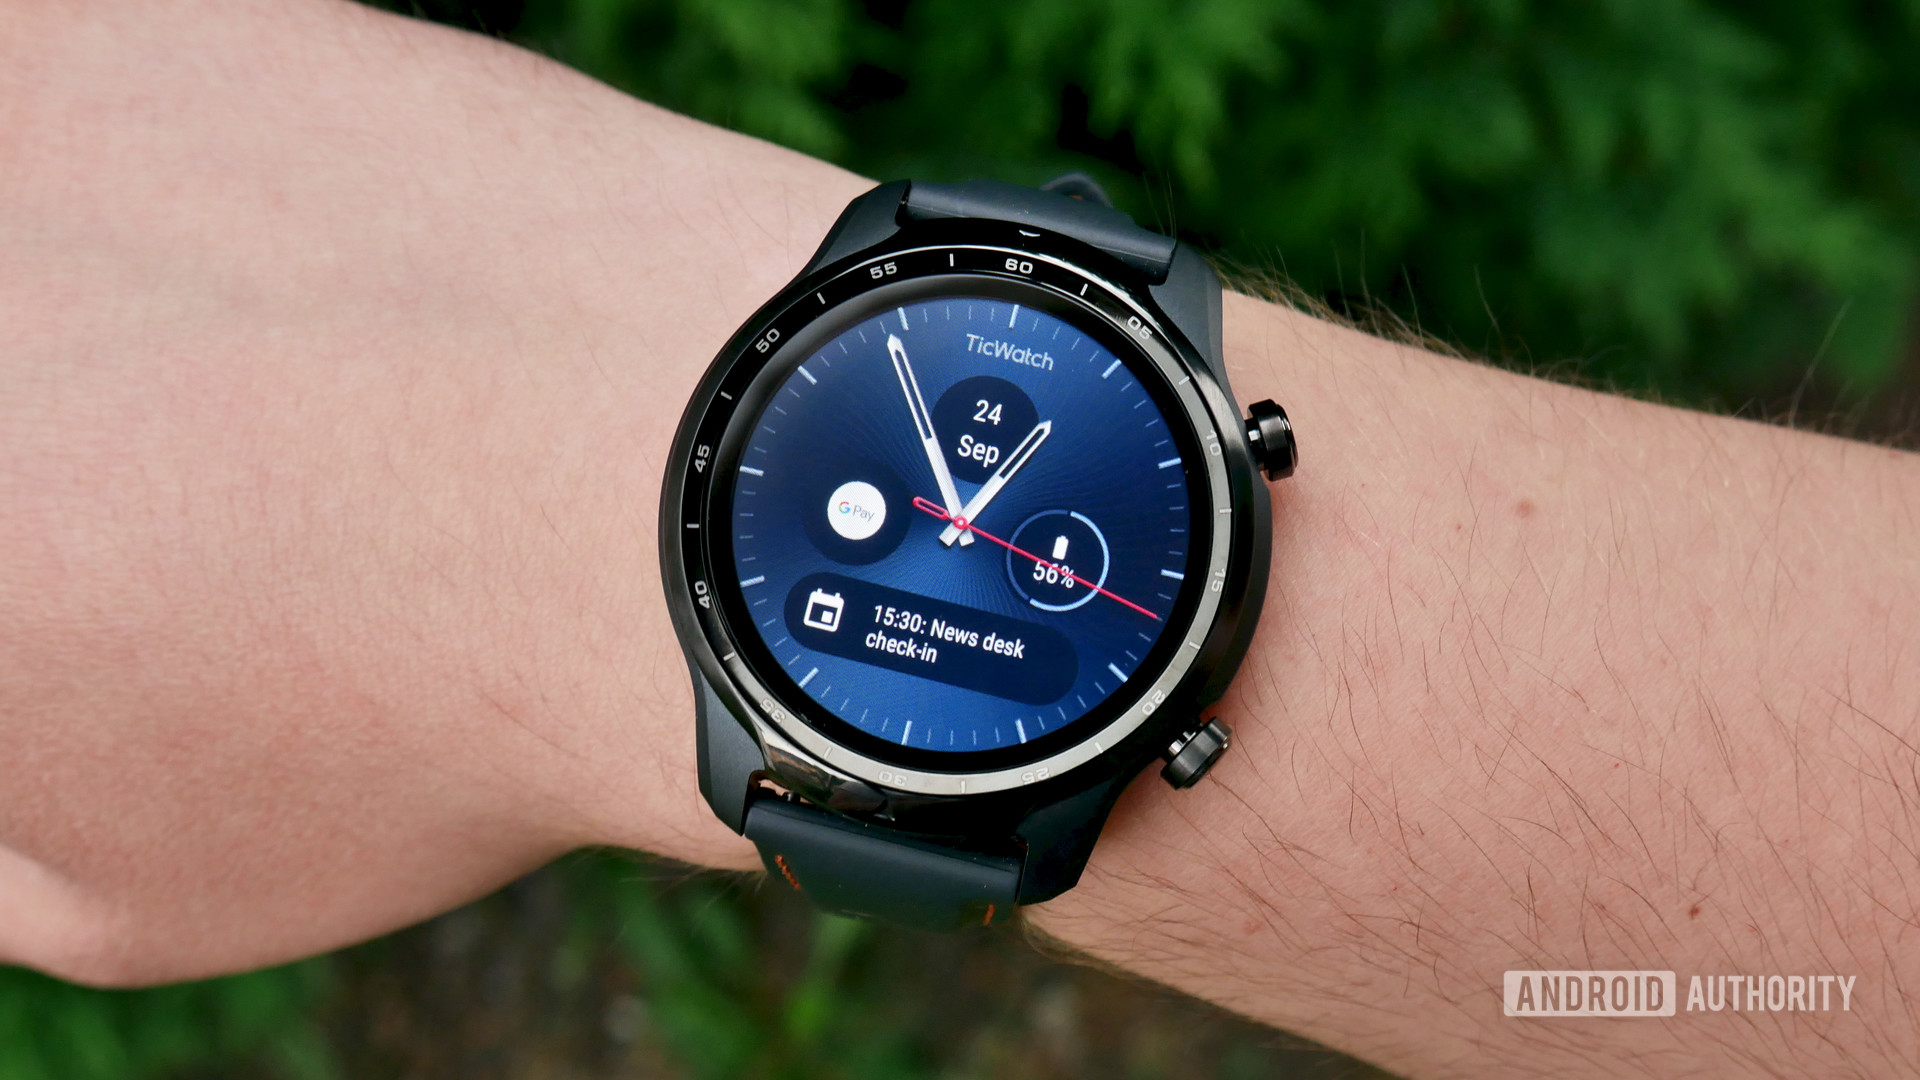 Gangster Maestro Avl TicWatch Pro 3 review: Resetting the bar for Wear OS smartwatches